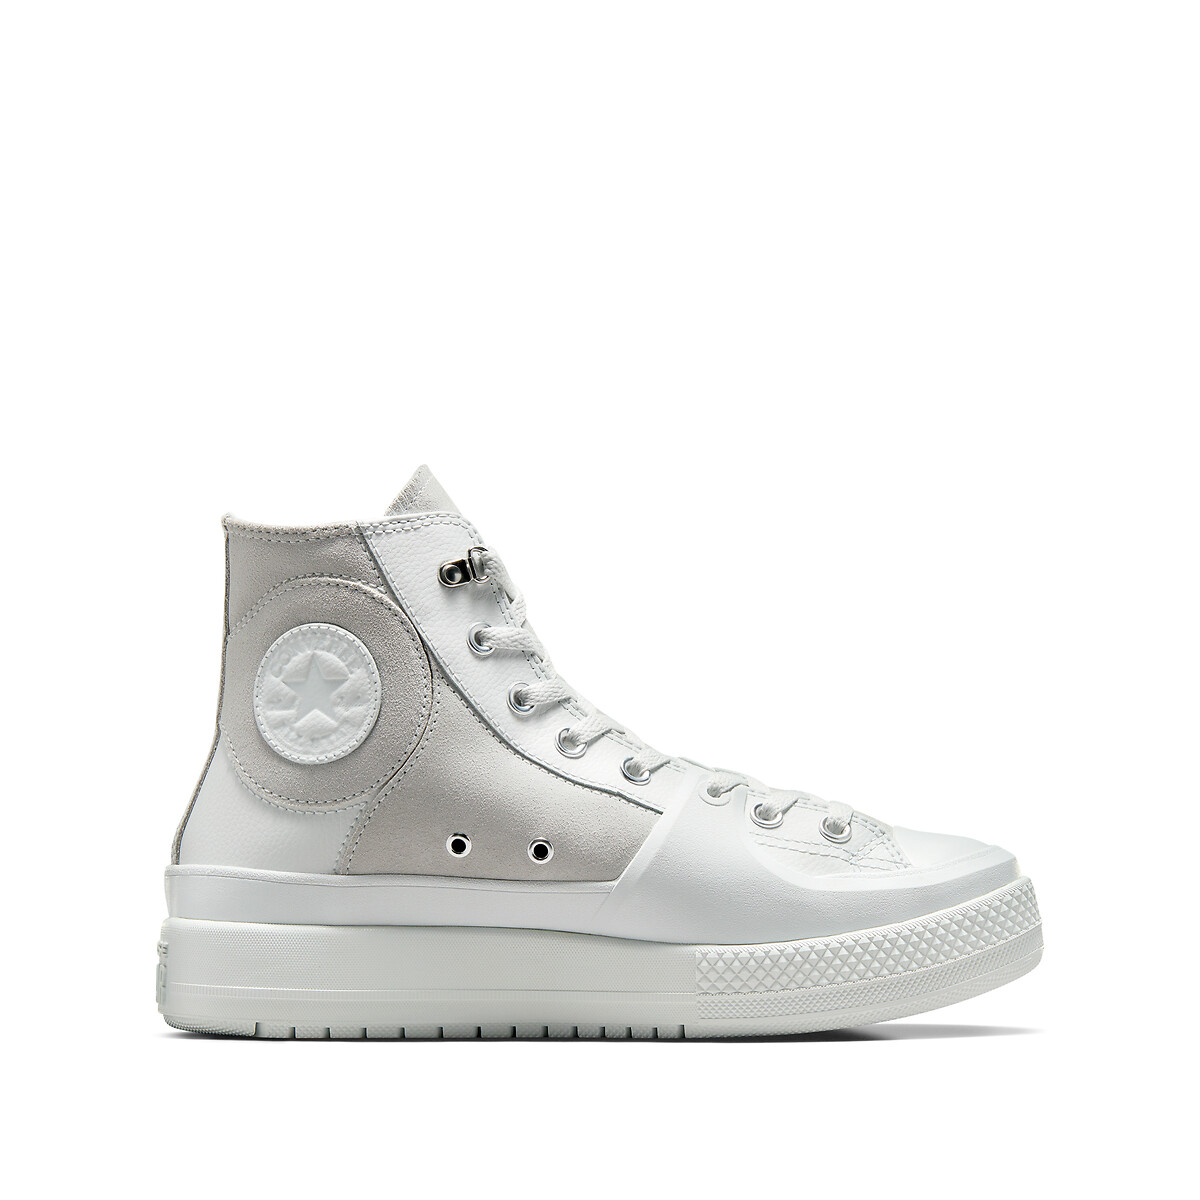 Construct Everyday Essentials Leather High Top Trainers